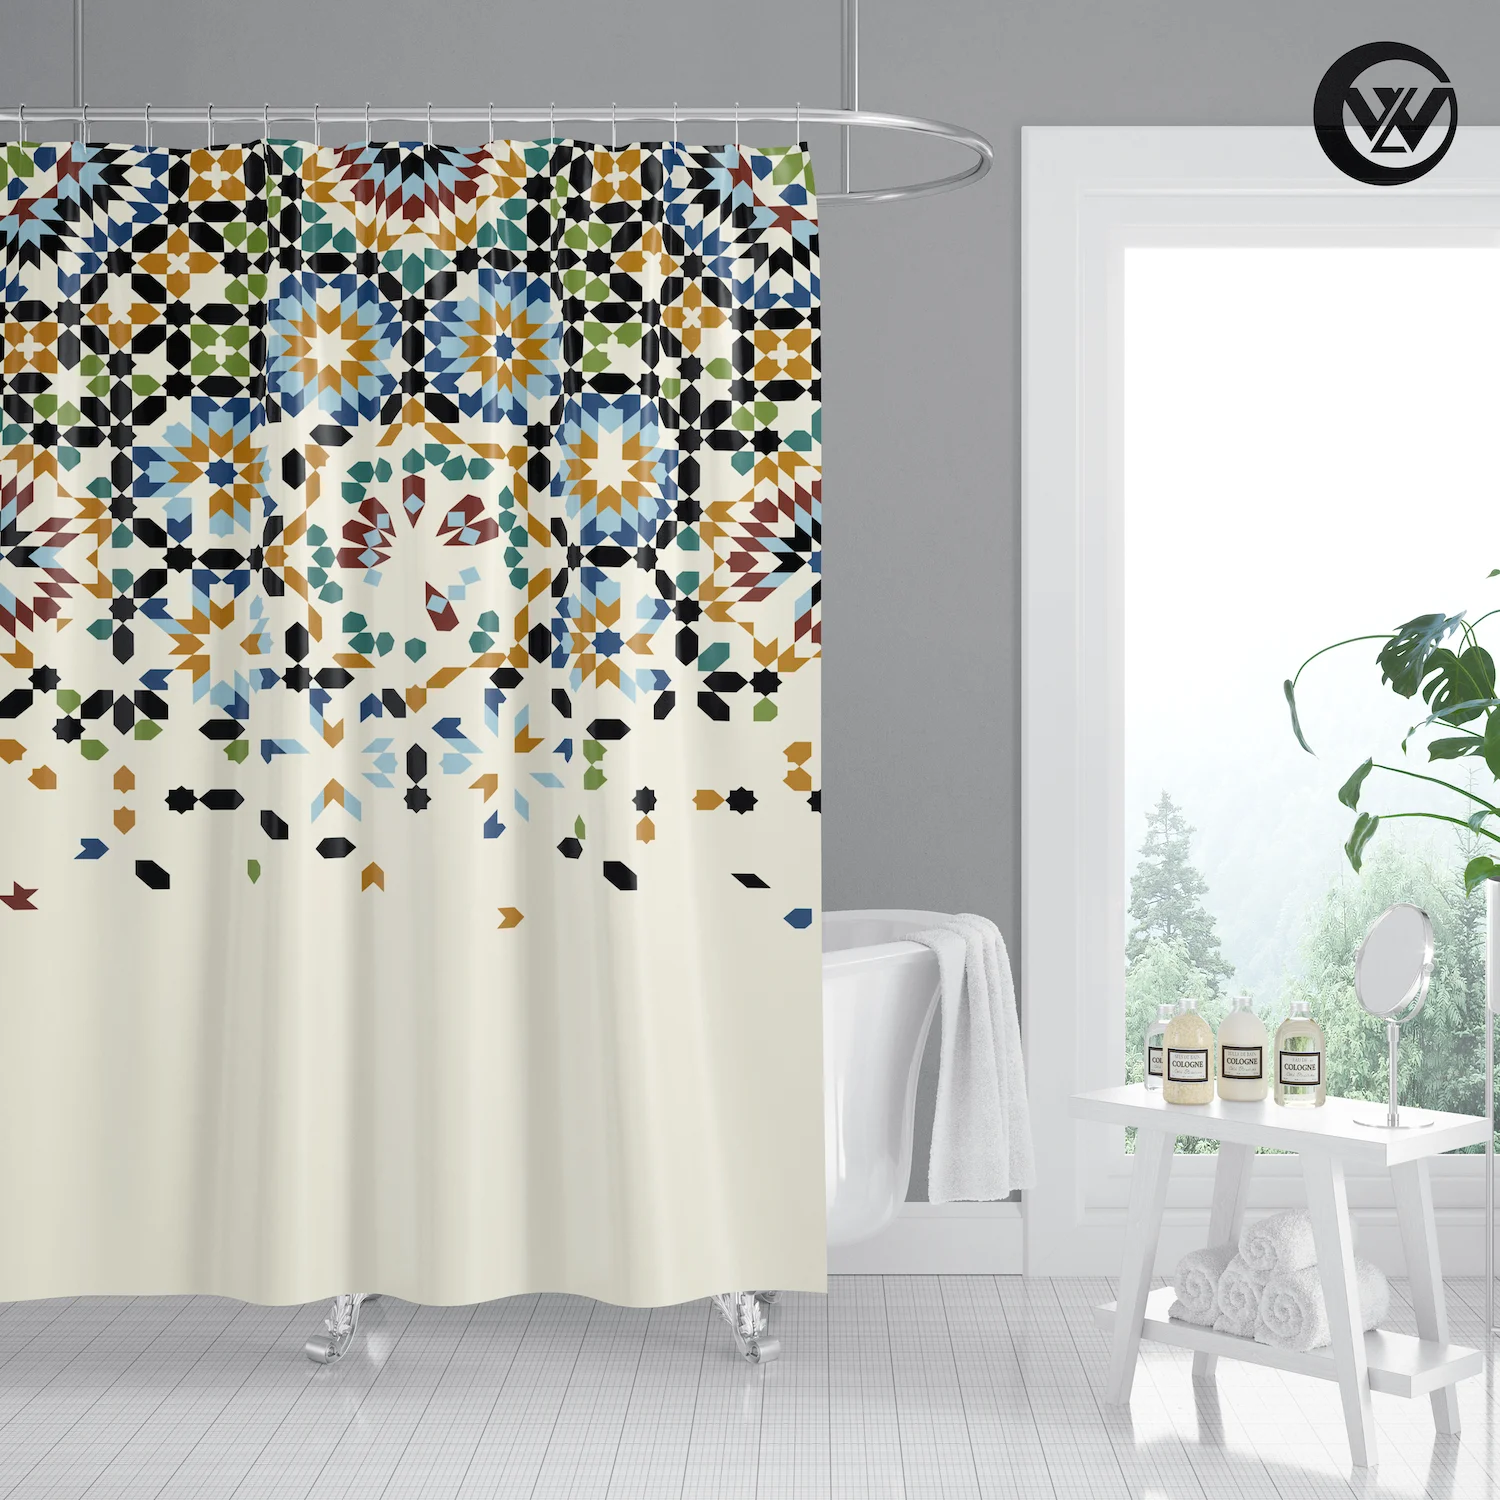 

Hot Sell Extra Long Polyester Geometric Bathroom Shower Curtains, Mildew Resistant Print Polyester Morocco Classic Bath Curtain/, Accept customized color